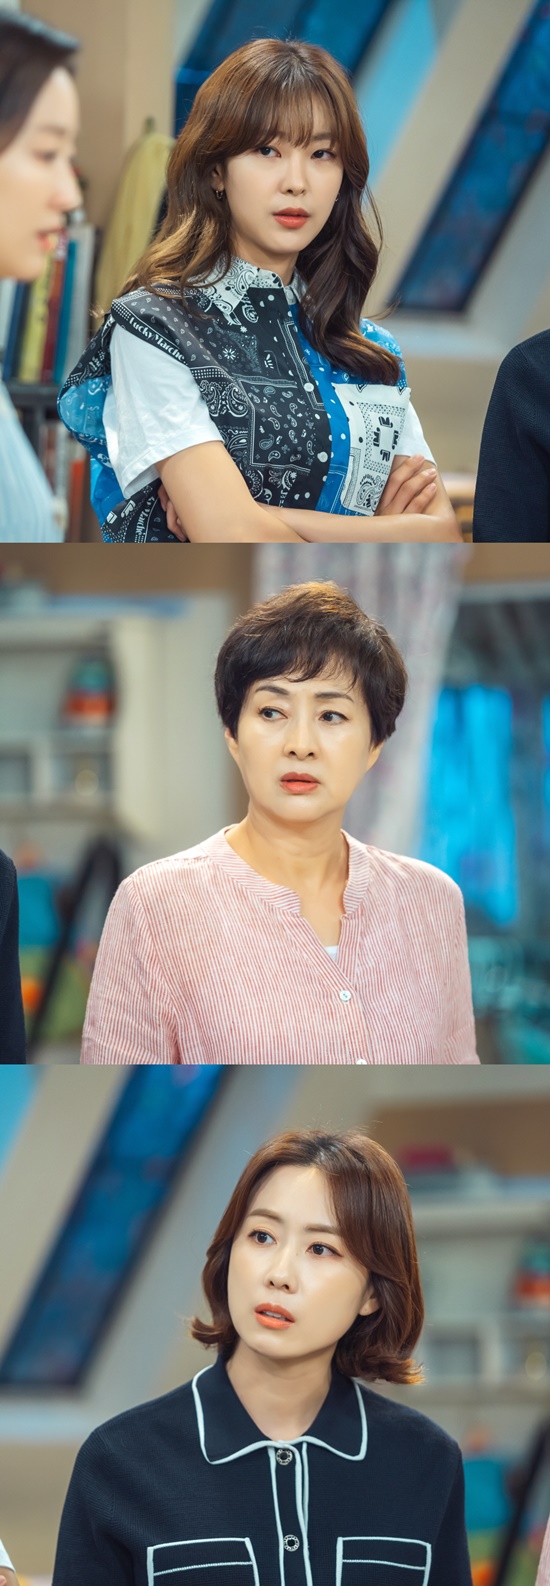 OK Photon Mae Jeon Hye-bin was spotted stationing Daechi with FamilyKBS 2TV Weekend drama OK Photon, which was broadcast on the 30th, exceeded 30% again with 27.5% of the nationwide ratings and 30.5% of the second part based on Nielsen Korea.Especially, all the channels broadcast on this day, all the programs, the audience rating was ranked first, and for the ninth consecutive week, the Weekend was the strongest player.In the last broadcast, when Lee Kwang-sik (Jeon Hye-bin) and Han Ye-seul (Kim Kyung-nam) were caught in love with their aunt, Lee Bo-hee, Han Ye-seul finally declared farewell, which caused viewers sadness.Obongja, who witnessed Lee Kwang-sik and Han Ye-seul while riding in a truck, was drawn to the house with Lee Kwang-sik.Lee Kwang-sik said that he could not finish with Han Ye-seul, and he even visited Han Ye-seul and spit out the poison.Han Ye-seul, who was devastated by this, eventually shocked Lee Kwang-sik by turning around alone, saying, When I will break up and break up now.On the 3rd, OK Photon Mae released a steel showing Lee Kwang-sik crying after Lee Kwang-nam (Hong Eun Hee), Lee Kwang-tae (Ko Won-hee), Oh Bong-ja and Taechi station.In the photo, there is a scene in which Lee Kwang-sik is facing the five-year-old, Lee Kwang-nam and Lee Kwang-tae,Lee Kwang-sik, who has a hard-on-the-spot look, pours his opinions toward the Family, but Lee Kwang-nam is confronted with a rant, Lee Kwang-tae with his arms folded, and Oh Bong-ja with a decisive expression.As the flames without concessions are pouring, Lee Kwang-sik, who is angry at the end, is seen tearing down and attention is focused on the story to be developed in the future.Their extreme Daechi station scene was filmed in May.It was always intimate and intense actors, but on this day, it was necessary to spread the urgency of confronting the sharpness of the drama and pole different opinions.Jeon Hye-bin began to tear up from rehearsals, maximizing the sentiment line, leading to the immersion of Hong Eun Hee, Ko Won-hee and Lee Bo-hee.When he started shooting in earnest, Jeon Hye-bin vividly portrayed Lee Kwang-sik, who cried out in anger, and Hong Eun Hee, Ko Won-hee, and Lee Bo-hee completed the voice with a voice.The production team said, Jeon Hye-bin and Hong Eun Hee - Ko Won-hee - Lee Bo-hees authentic Acting Hap has made the scene breathless. I hope you will expect 23 broadcasts this week to see what will happen to Lee Kwang-sik, who has a heartbreaking farewell,Photo: KBS 2TV OK Photon Mae